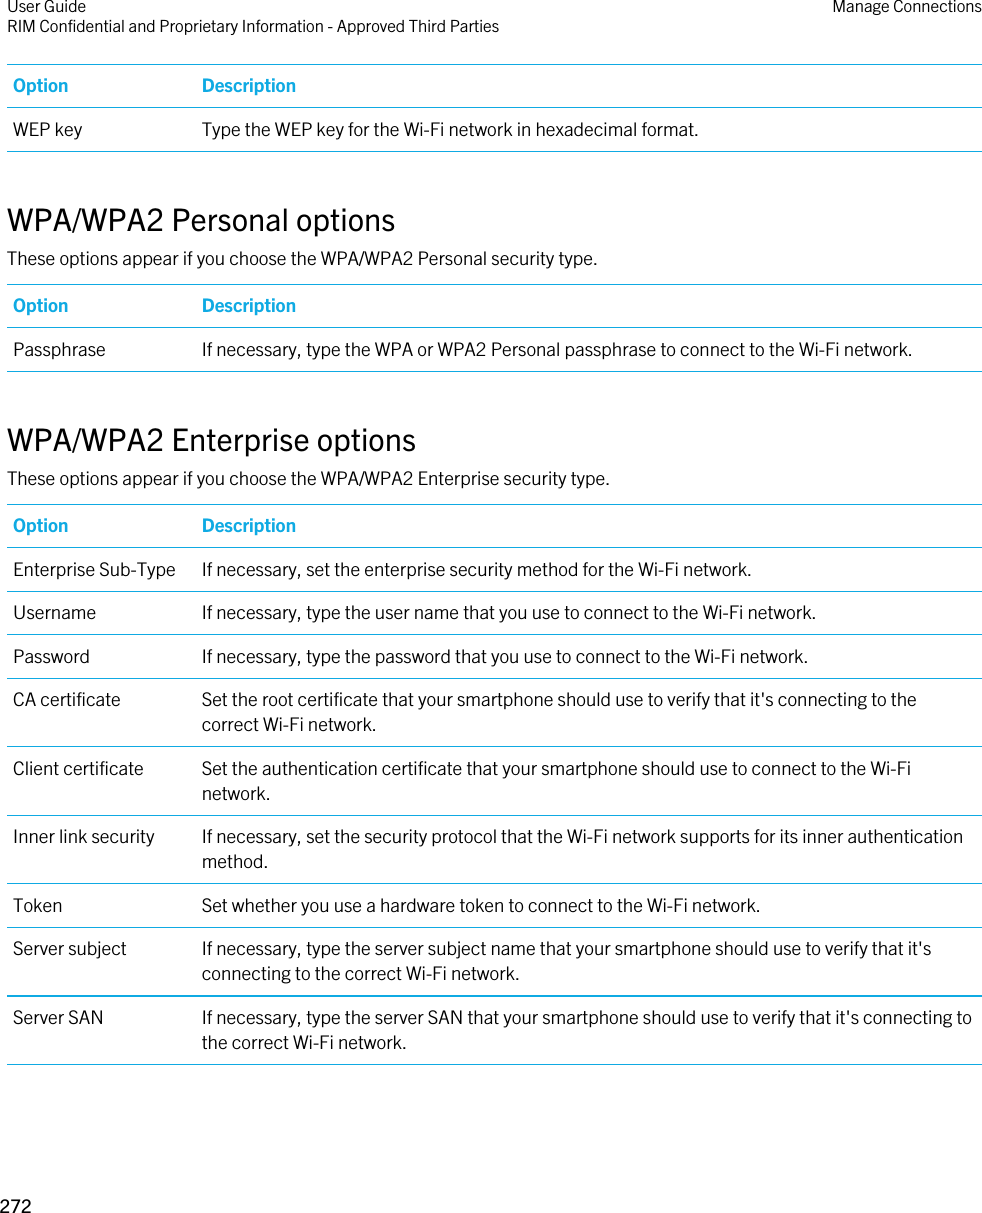 Option DescriptionWEP key Type the WEP key for the Wi-Fi network in hexadecimal format.WPA/WPA2 Personal optionsThese options appear if you choose the WPA/WPA2 Personal security type.Option DescriptionPassphrase If necessary, type the WPA or WPA2 Personal passphrase to connect to the Wi-Fi network.WPA/WPA2 Enterprise optionsThese options appear if you choose the WPA/WPA2 Enterprise security type.Option DescriptionEnterprise Sub-Type If necessary, set the enterprise security method for the Wi-Fi network.Username If necessary, type the user name that you use to connect to the Wi-Fi network.Password If necessary, type the password that you use to connect to the Wi-Fi network.CA certificate Set the root certificate that your smartphone should use to verify that it&apos;s connecting to the correct Wi-Fi network.Client certificate Set the authentication certificate that your smartphone should use to connect to the Wi-Fi network.Inner link security If necessary, set the security protocol that the Wi-Fi network supports for its inner authentication method.Token Set whether you use a hardware token to connect to the Wi-Fi network.Server subject If necessary, type the server subject name that your smartphone should use to verify that it&apos;s connecting to the correct Wi-Fi network.Server SAN If necessary, type the server SAN that your smartphone should use to verify that it&apos;s connecting to the correct Wi-Fi network.User GuideRIM Confidential and Proprietary Information - Approved Third Parties Manage Connections272 